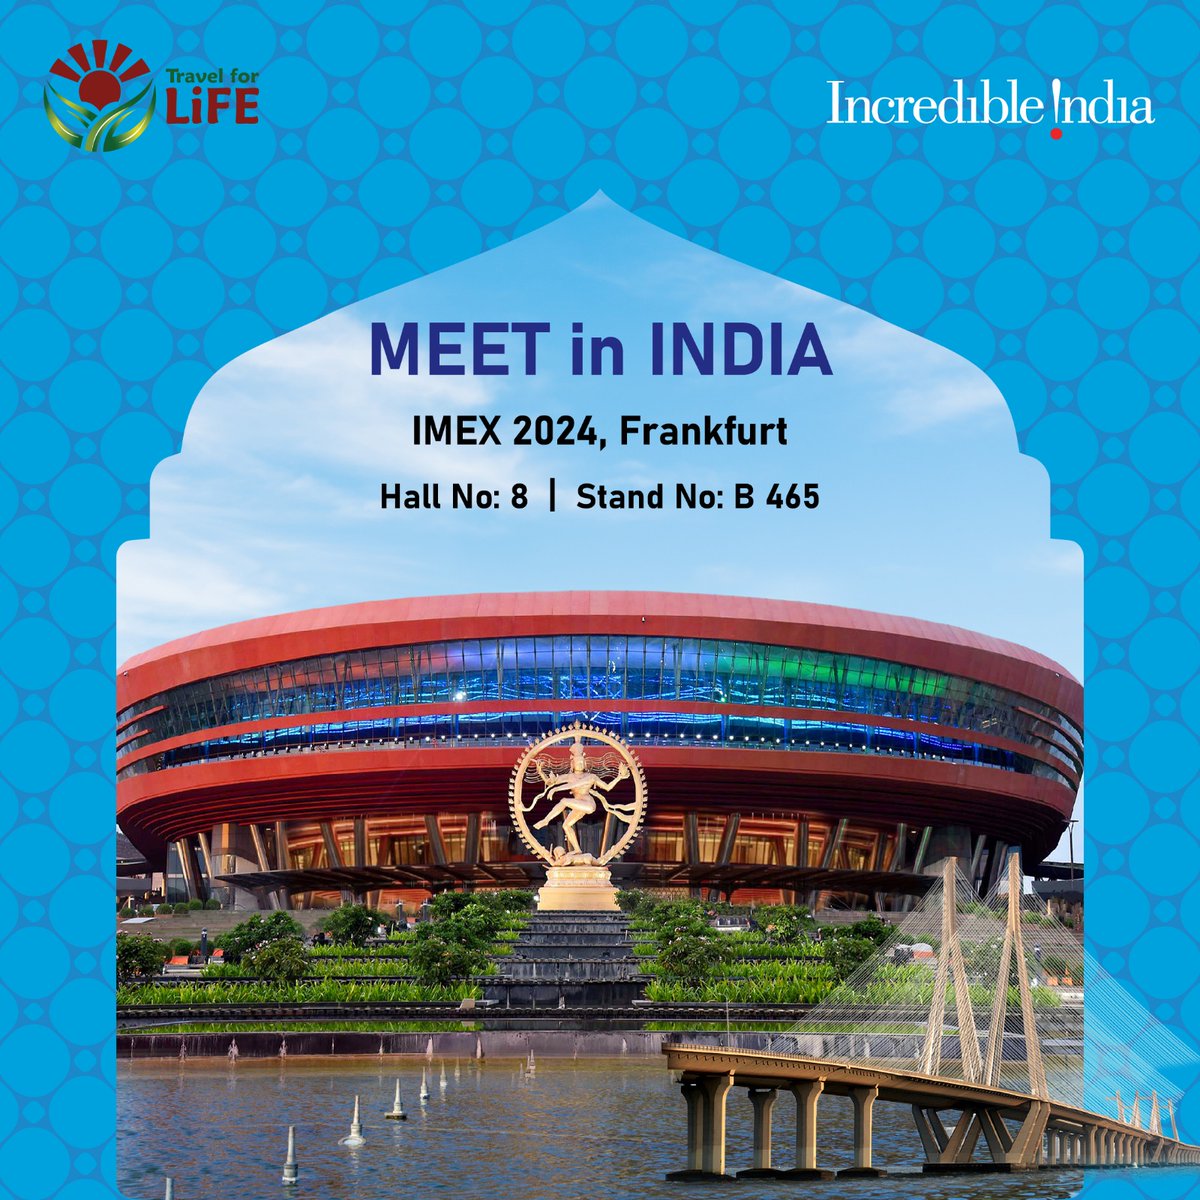 Meet in India at IMEX, Frankfurt 2024!! India participates at IMEX 2024 along with industry stakeholders for promoting India as a potential MICE destination and to network with global Convention & Conference organizers to bring in more Conferences and meetings in India. Strong